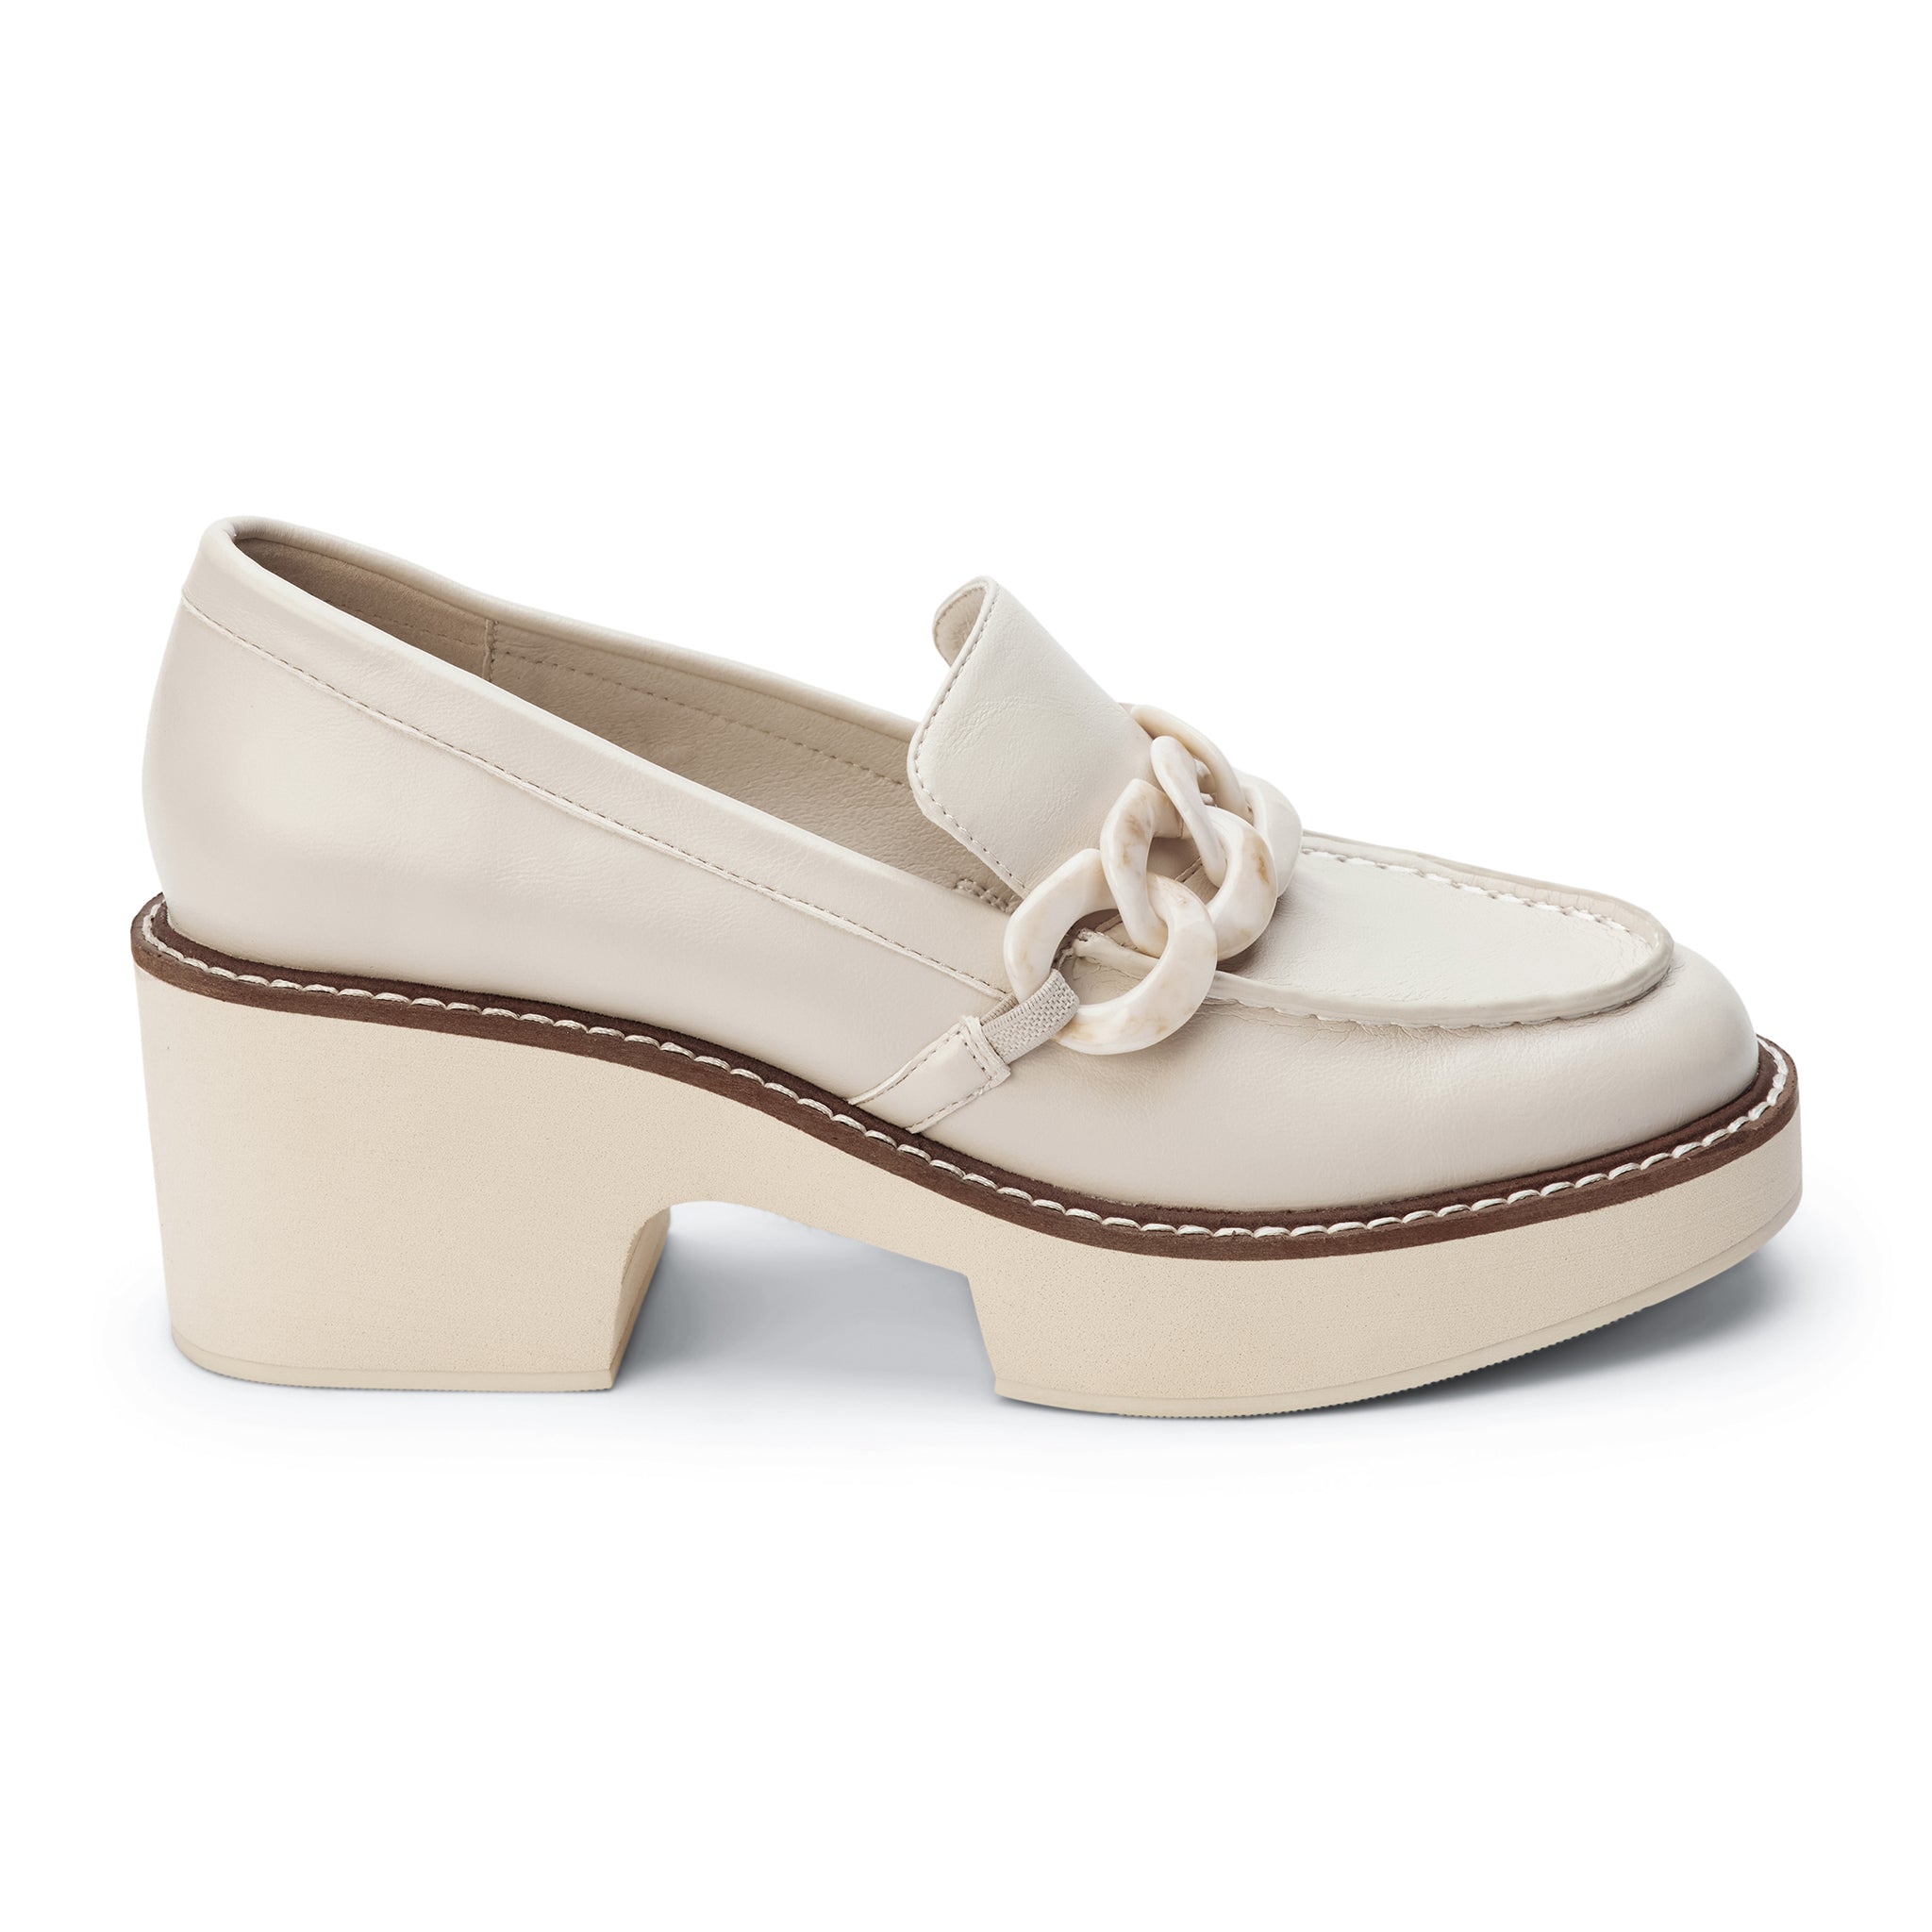 Coconuts by Matisse Women's Louie Platform Loafers